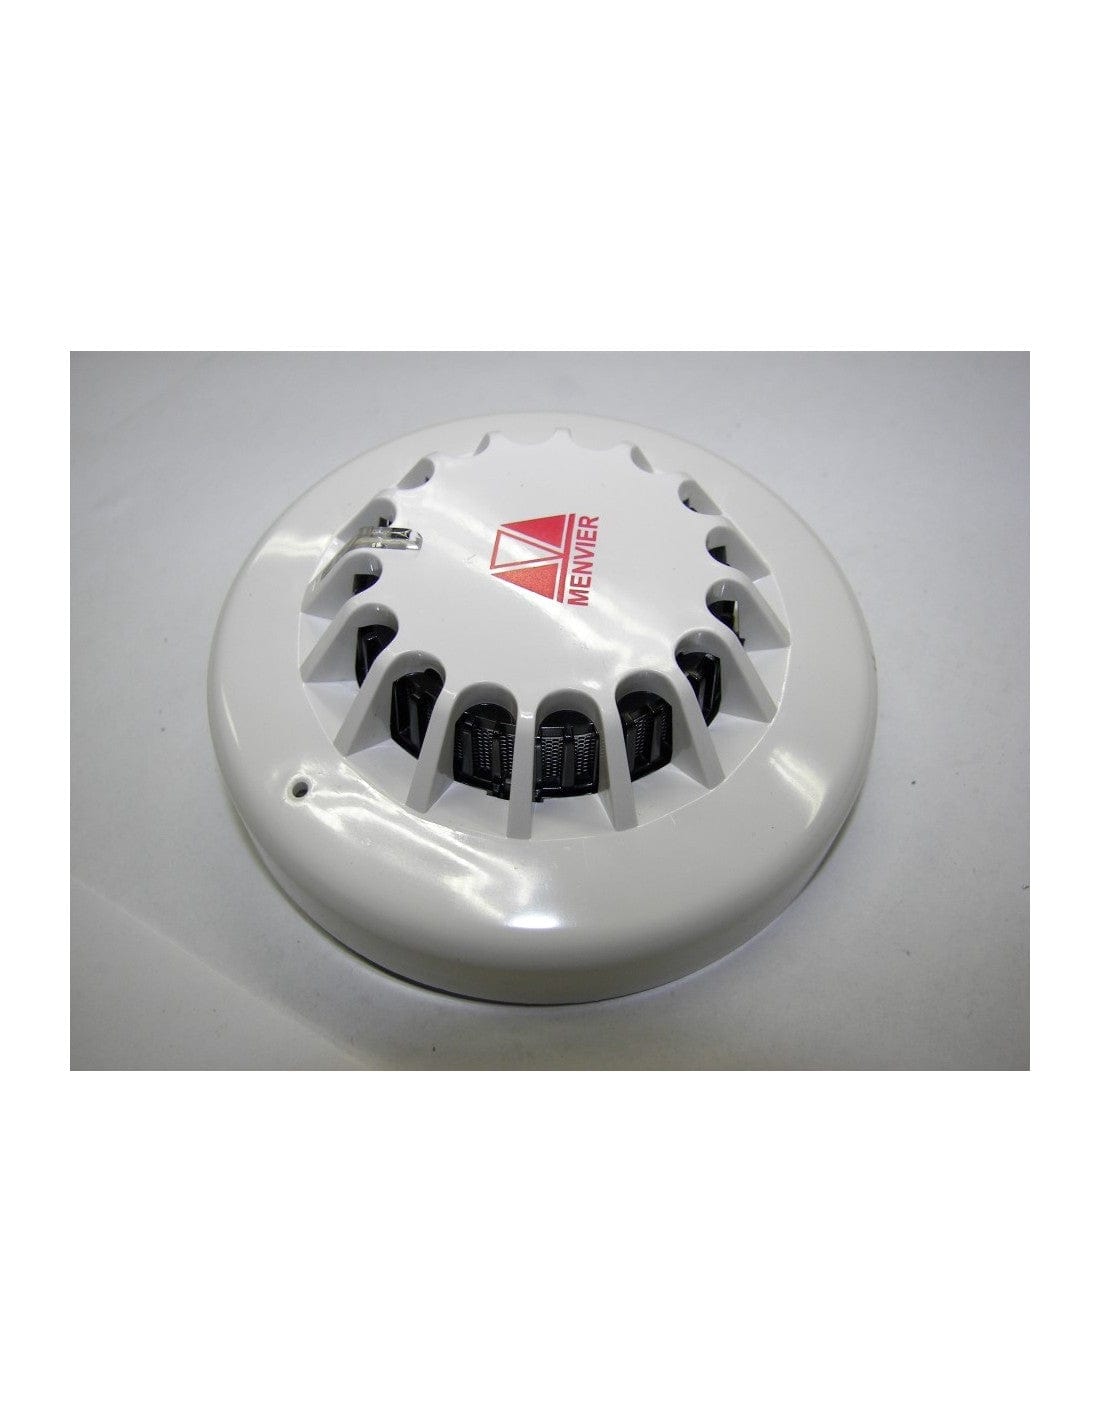 Buy Menvier Ionization Smoke Detector - MID810 in Accra, Ghana | Supply Master Fire Safety Equipment Buy Tools hardware Building materials